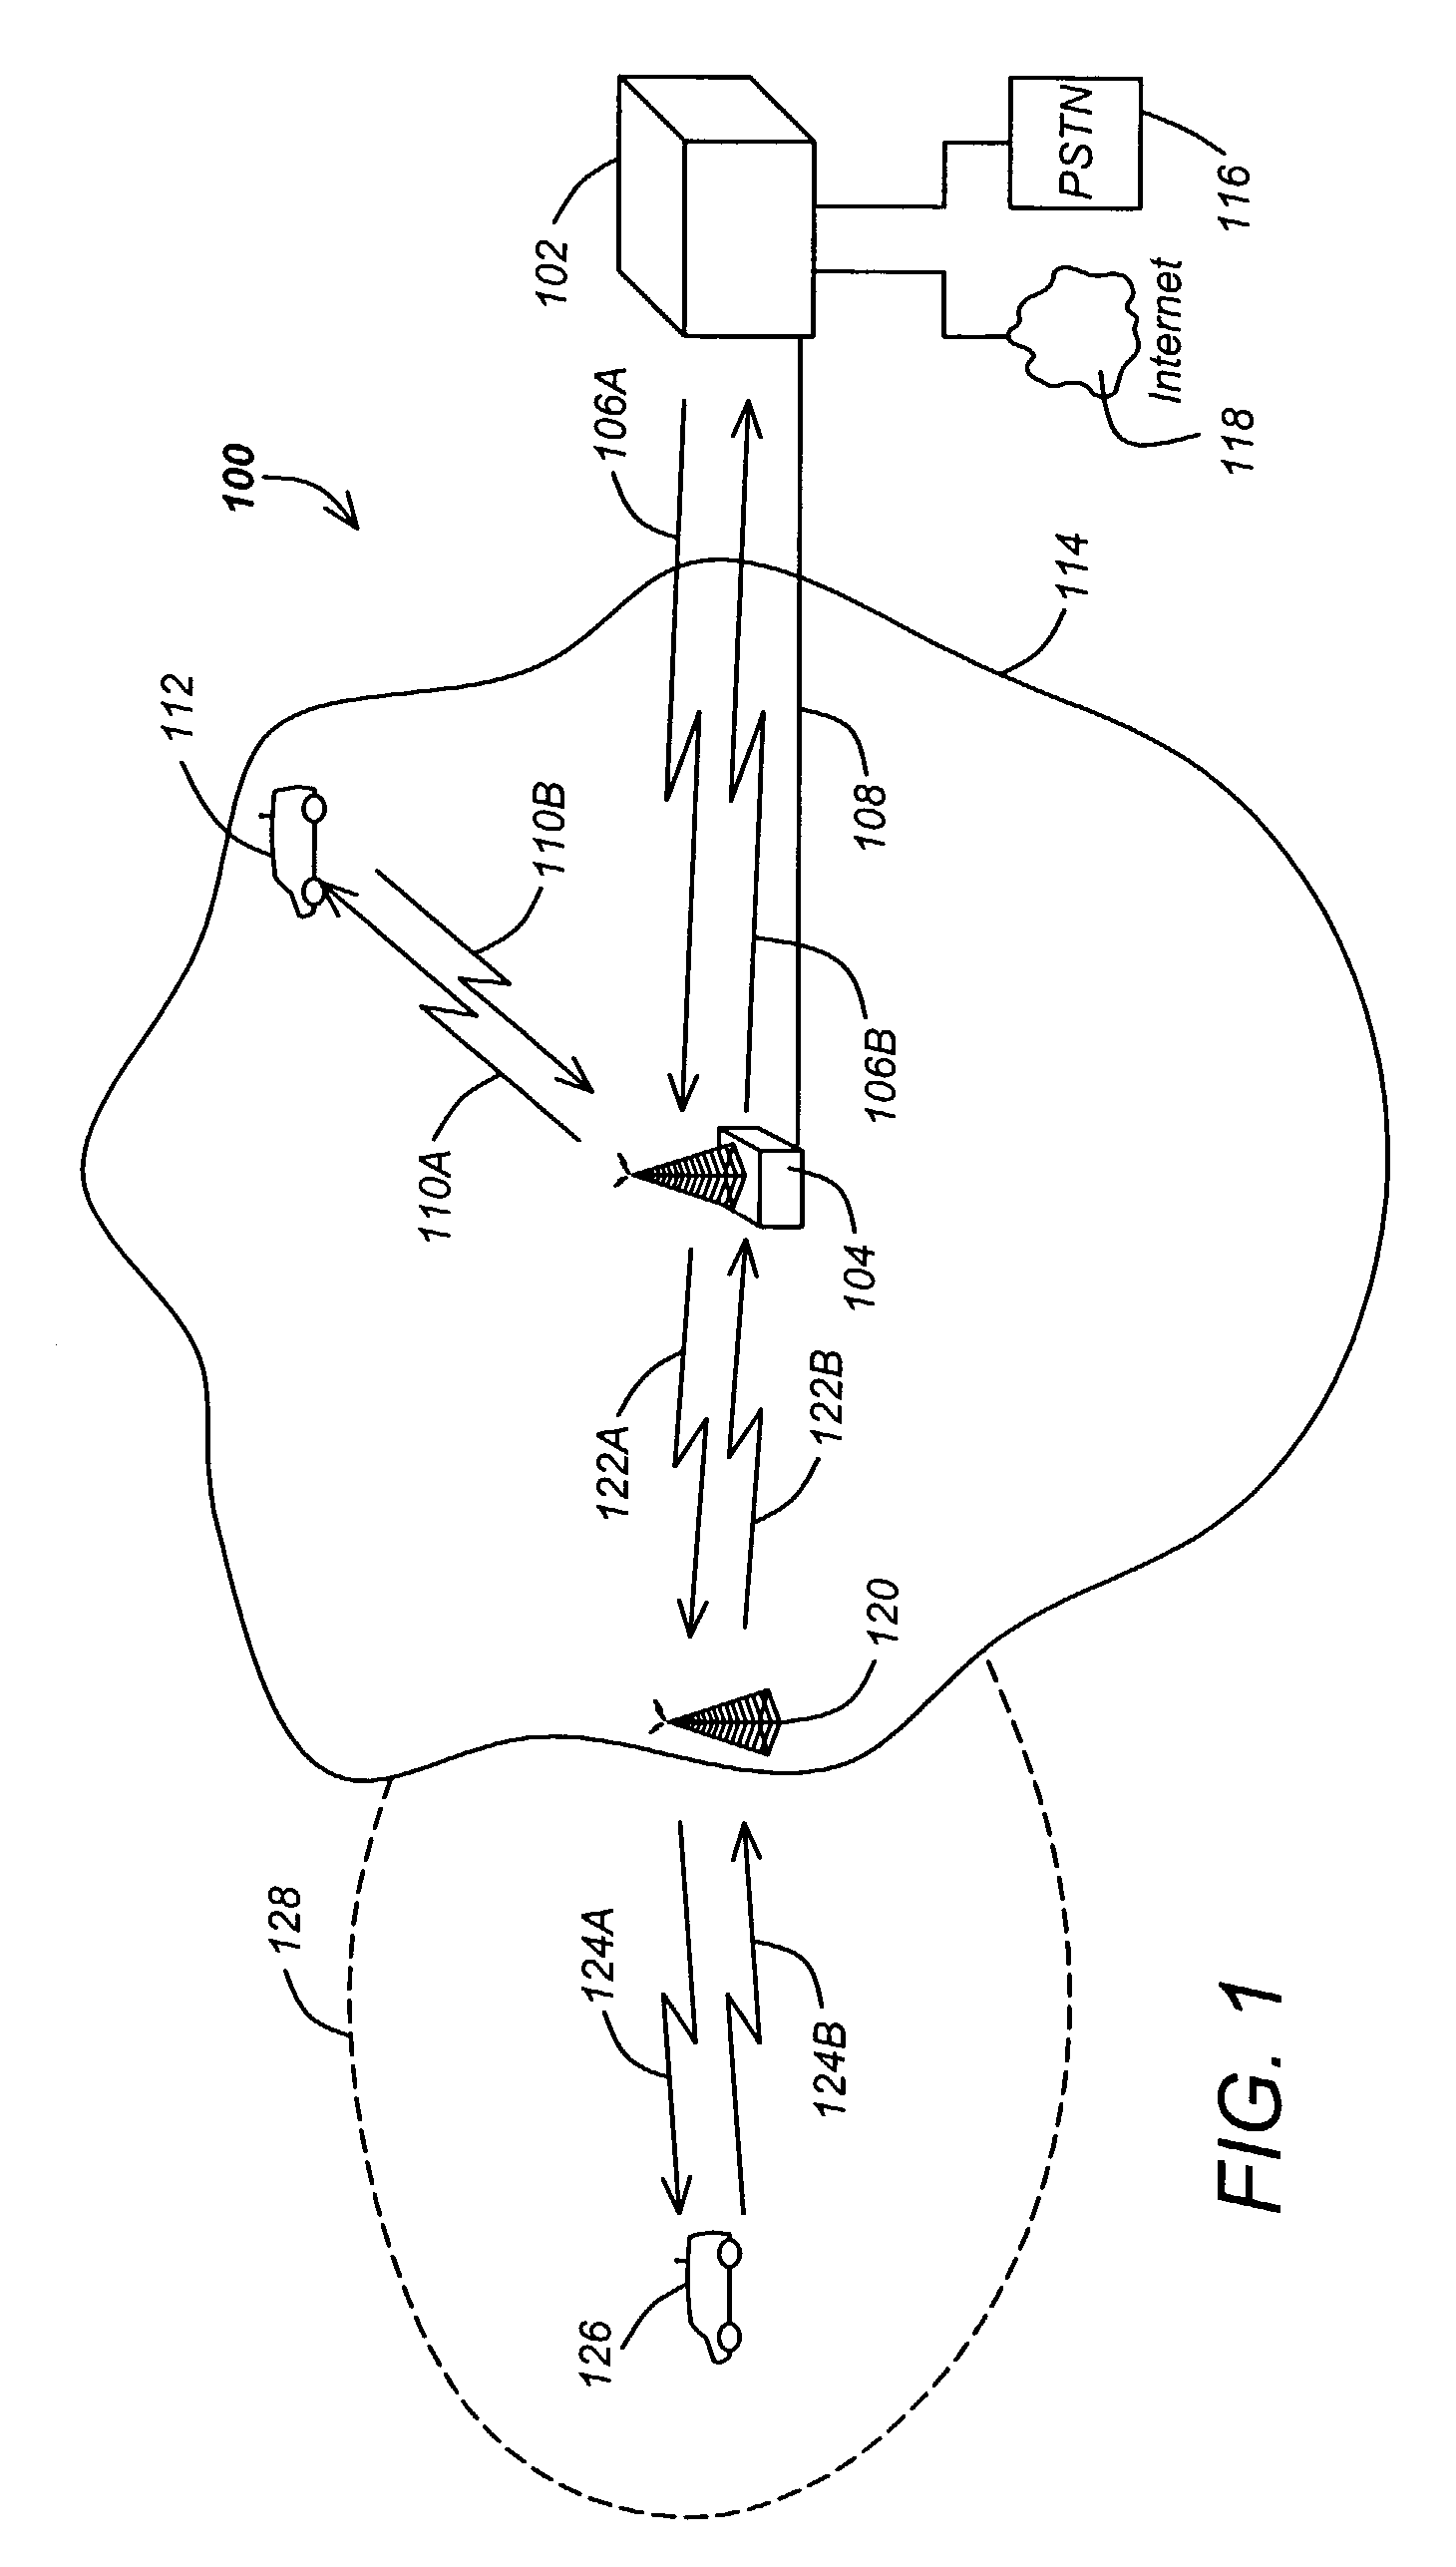 Method and system for identifying and monitoring repeater traffic in a code division multiple access system